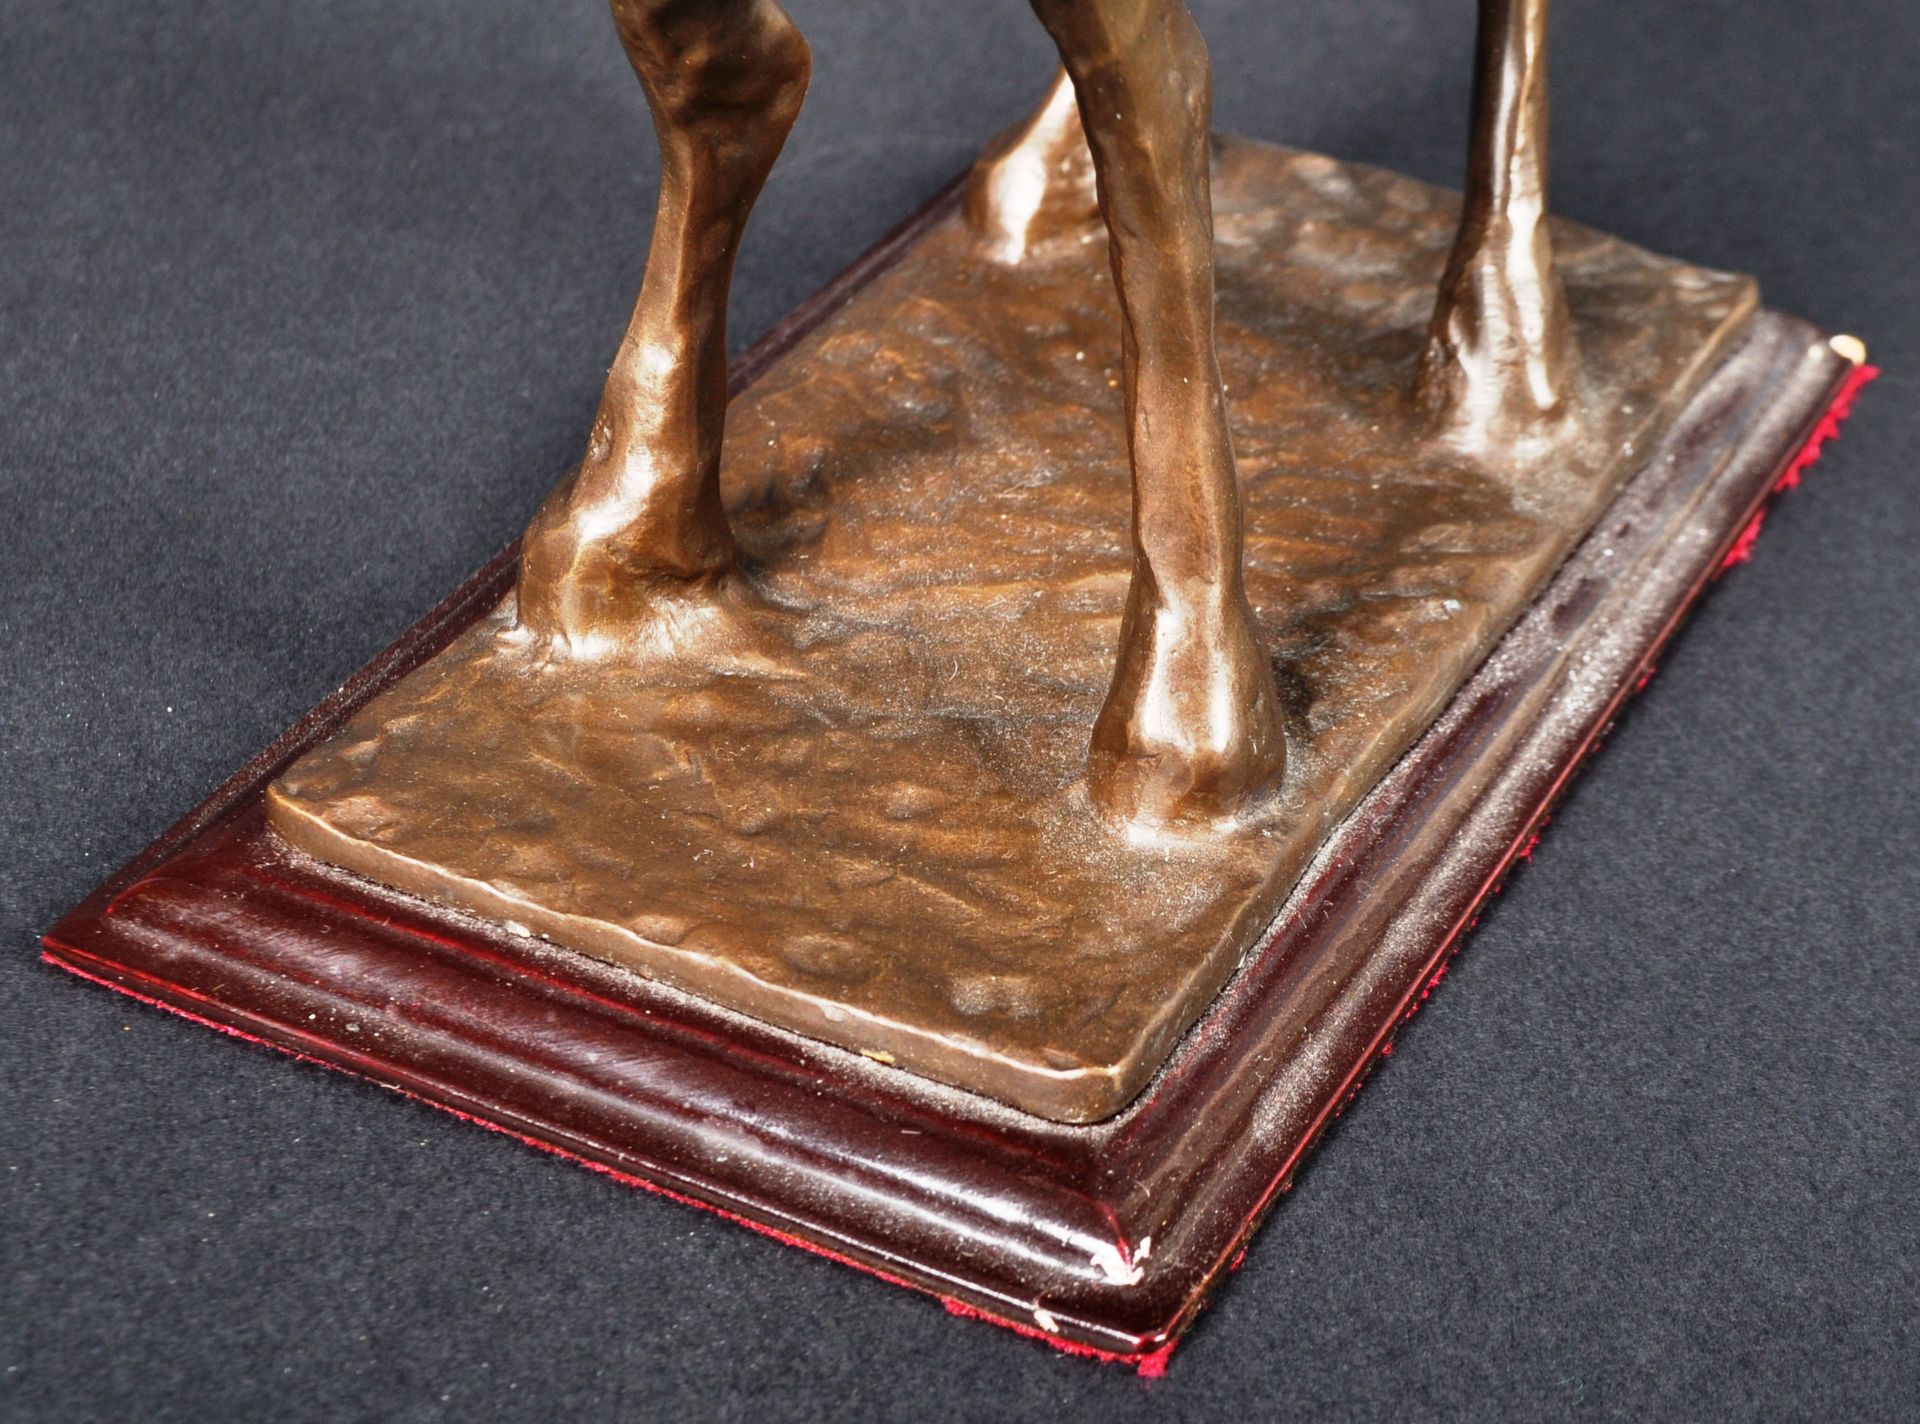 CONTEMPORARY BRONZE WORKED SCULPTURE OF AN ANTELOPE - Image 4 of 6